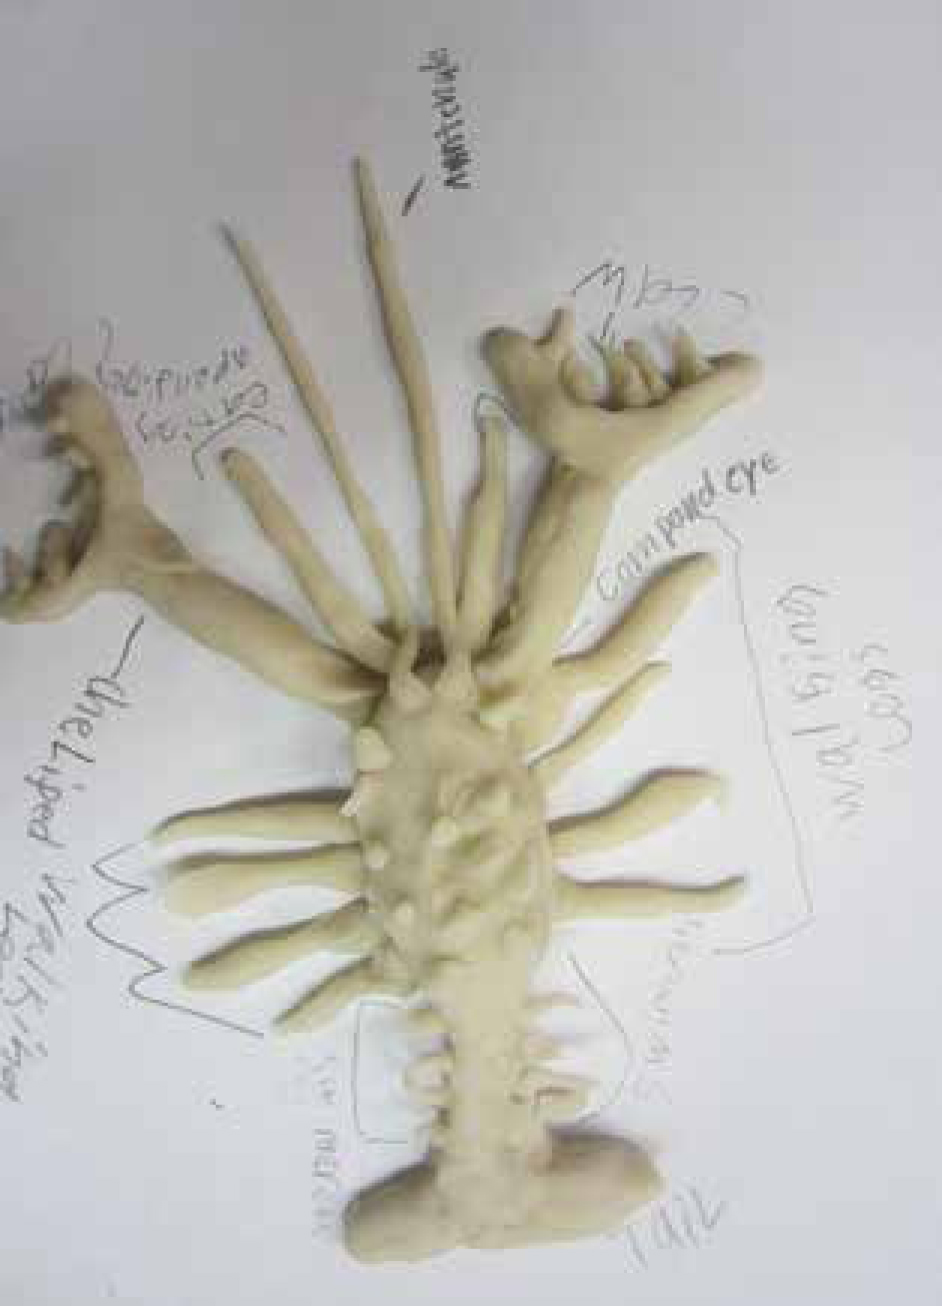 Model of crayfish with labels.